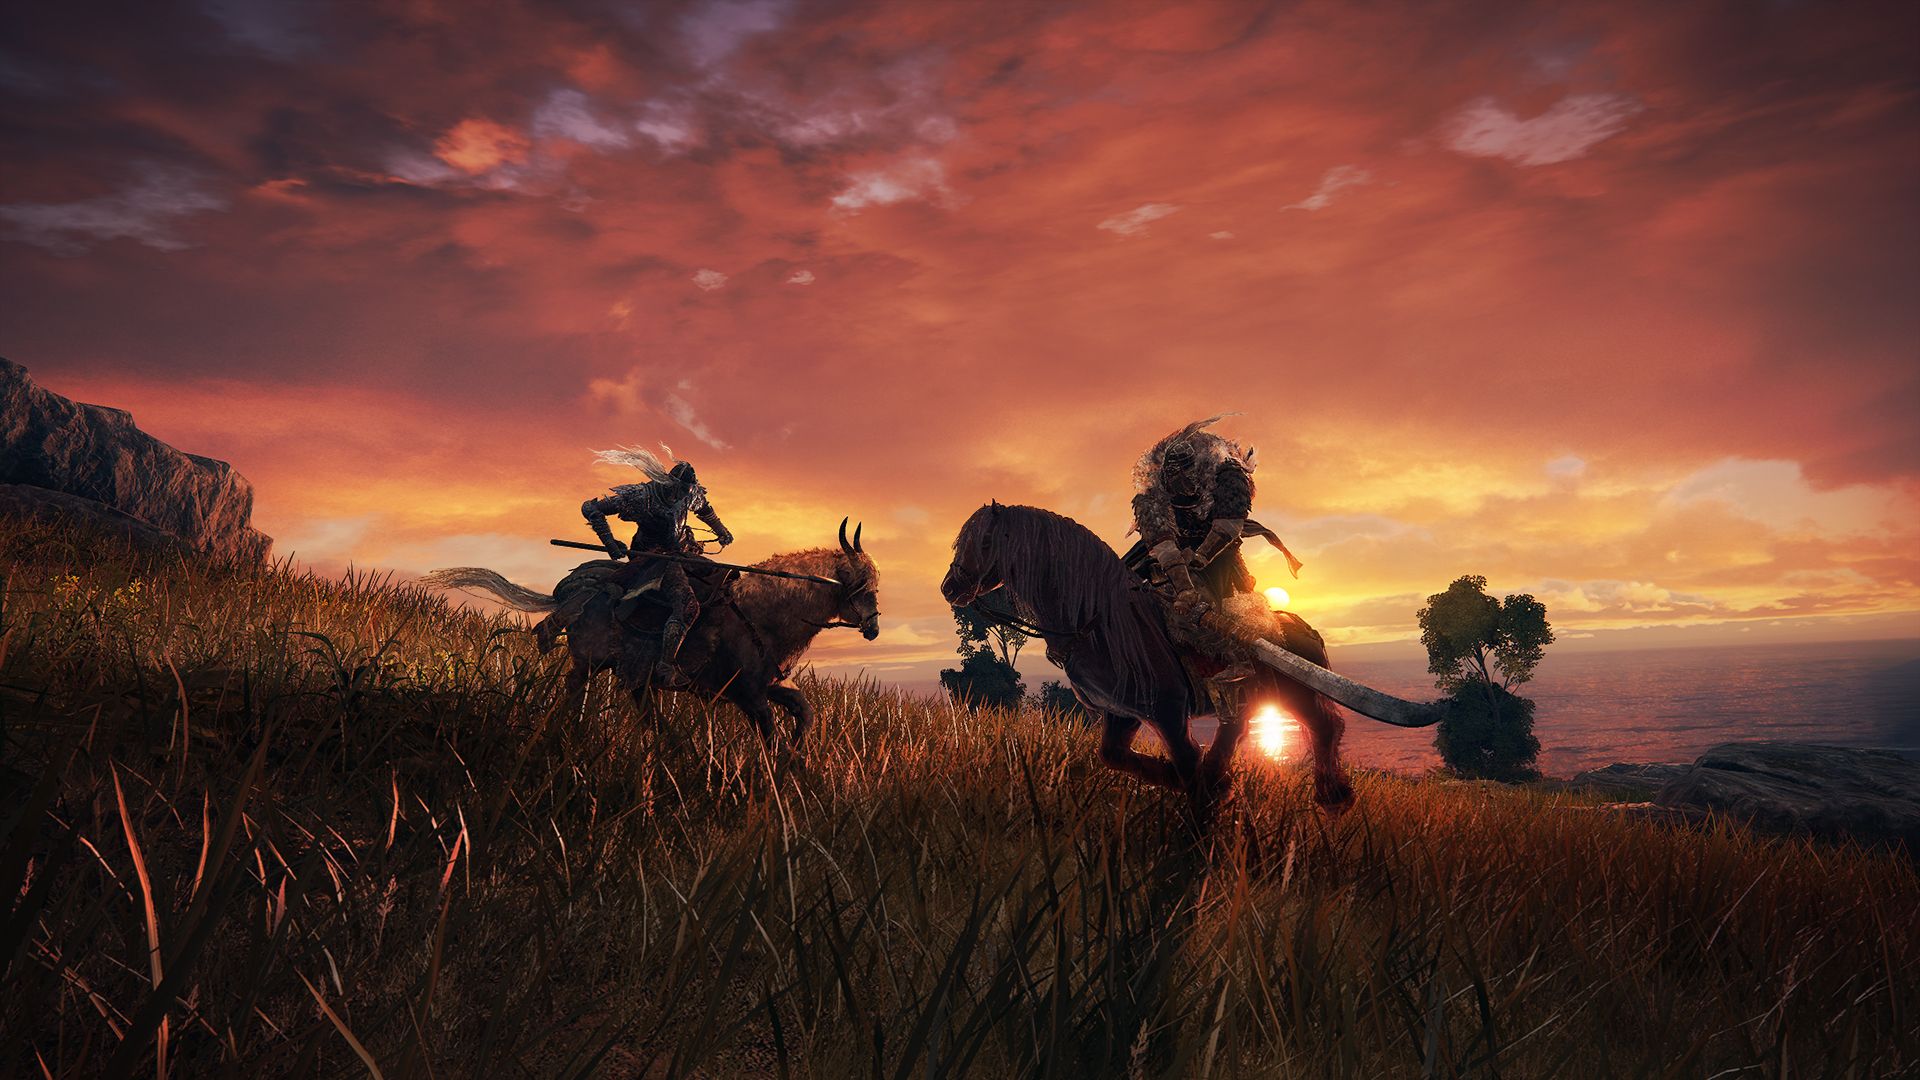 The player riding a horse, about to attack a mounted enemy.